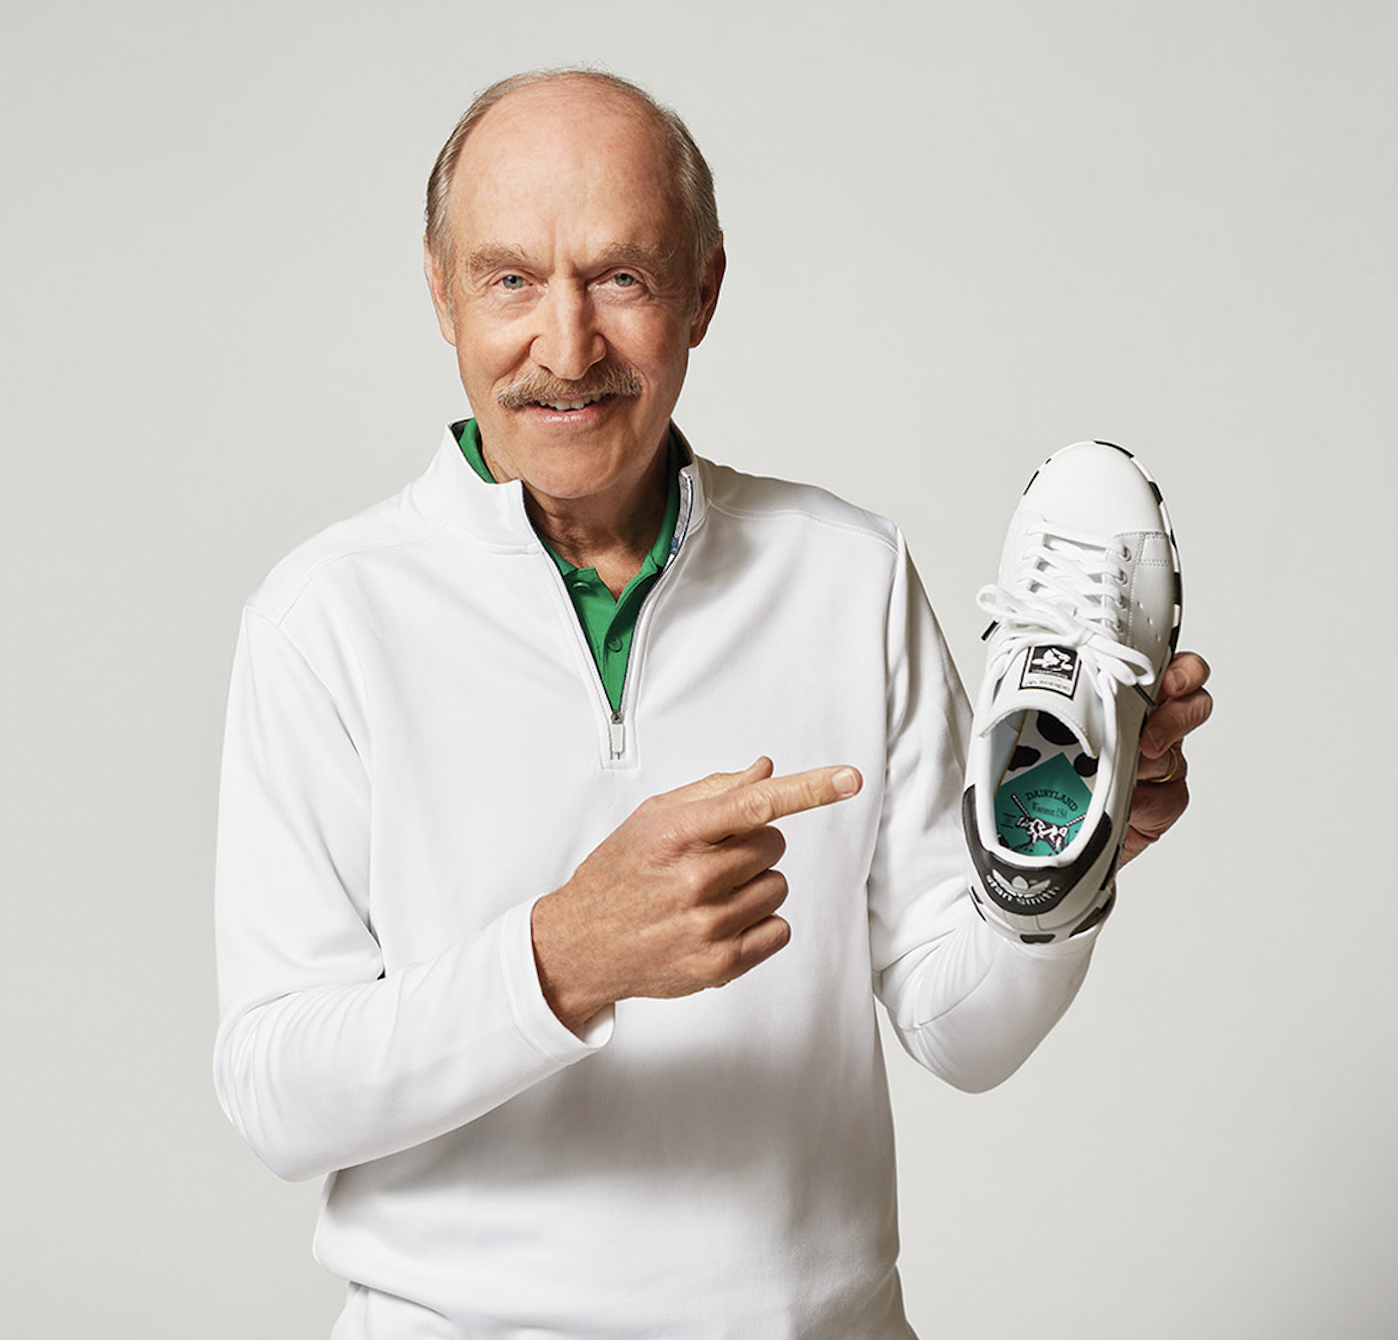 Adidas launches limited-edition Stan Smith golf shoe – GolfWRX